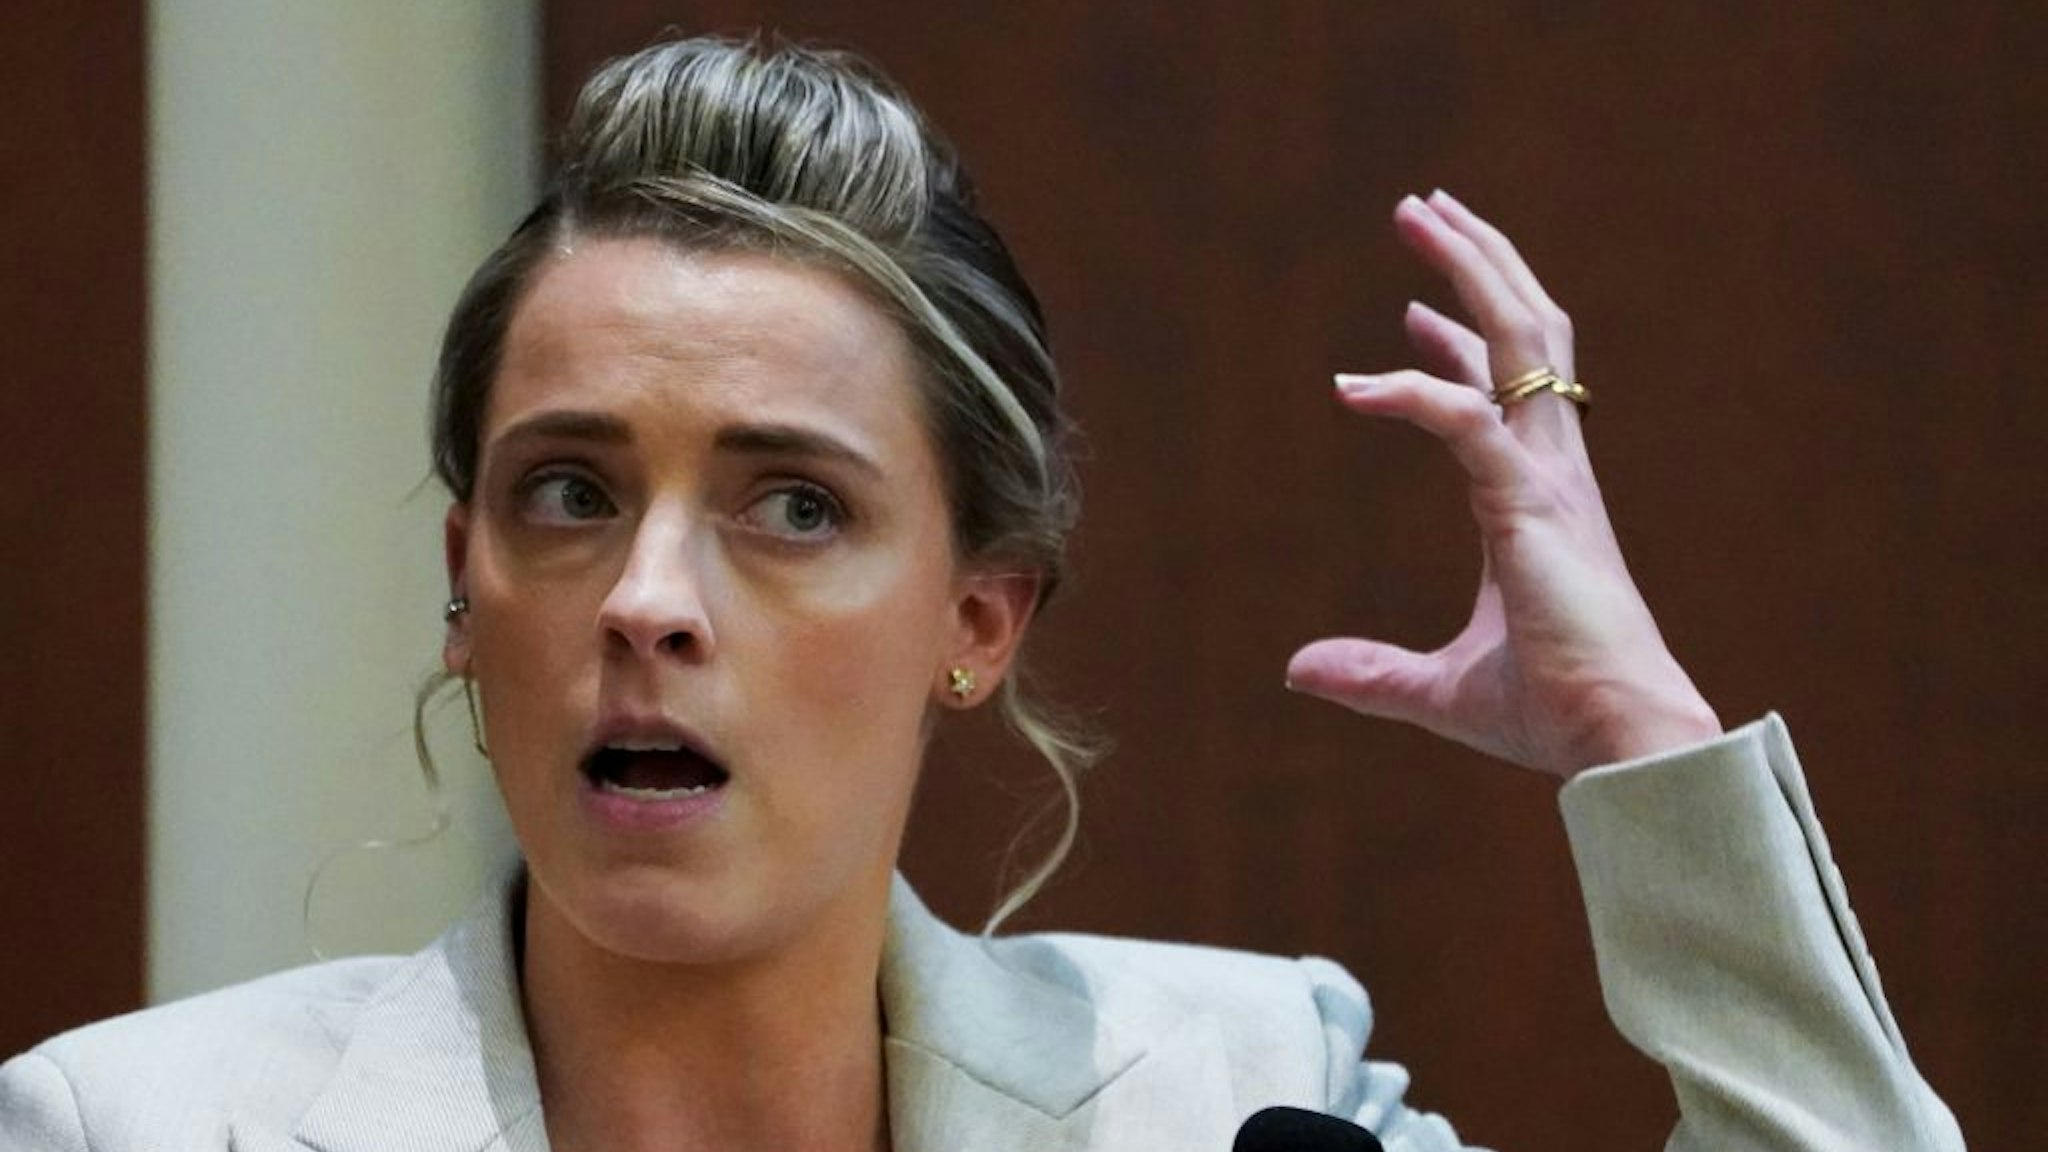 Whitney Henriquez, sister of Actor Amber Heard, testifies on the stand during Johnny Depp's defamation trial against ex-wife Amber Heard at the Fairfax County Circuit Courthouse in Fairfax, on May 18, 2022.